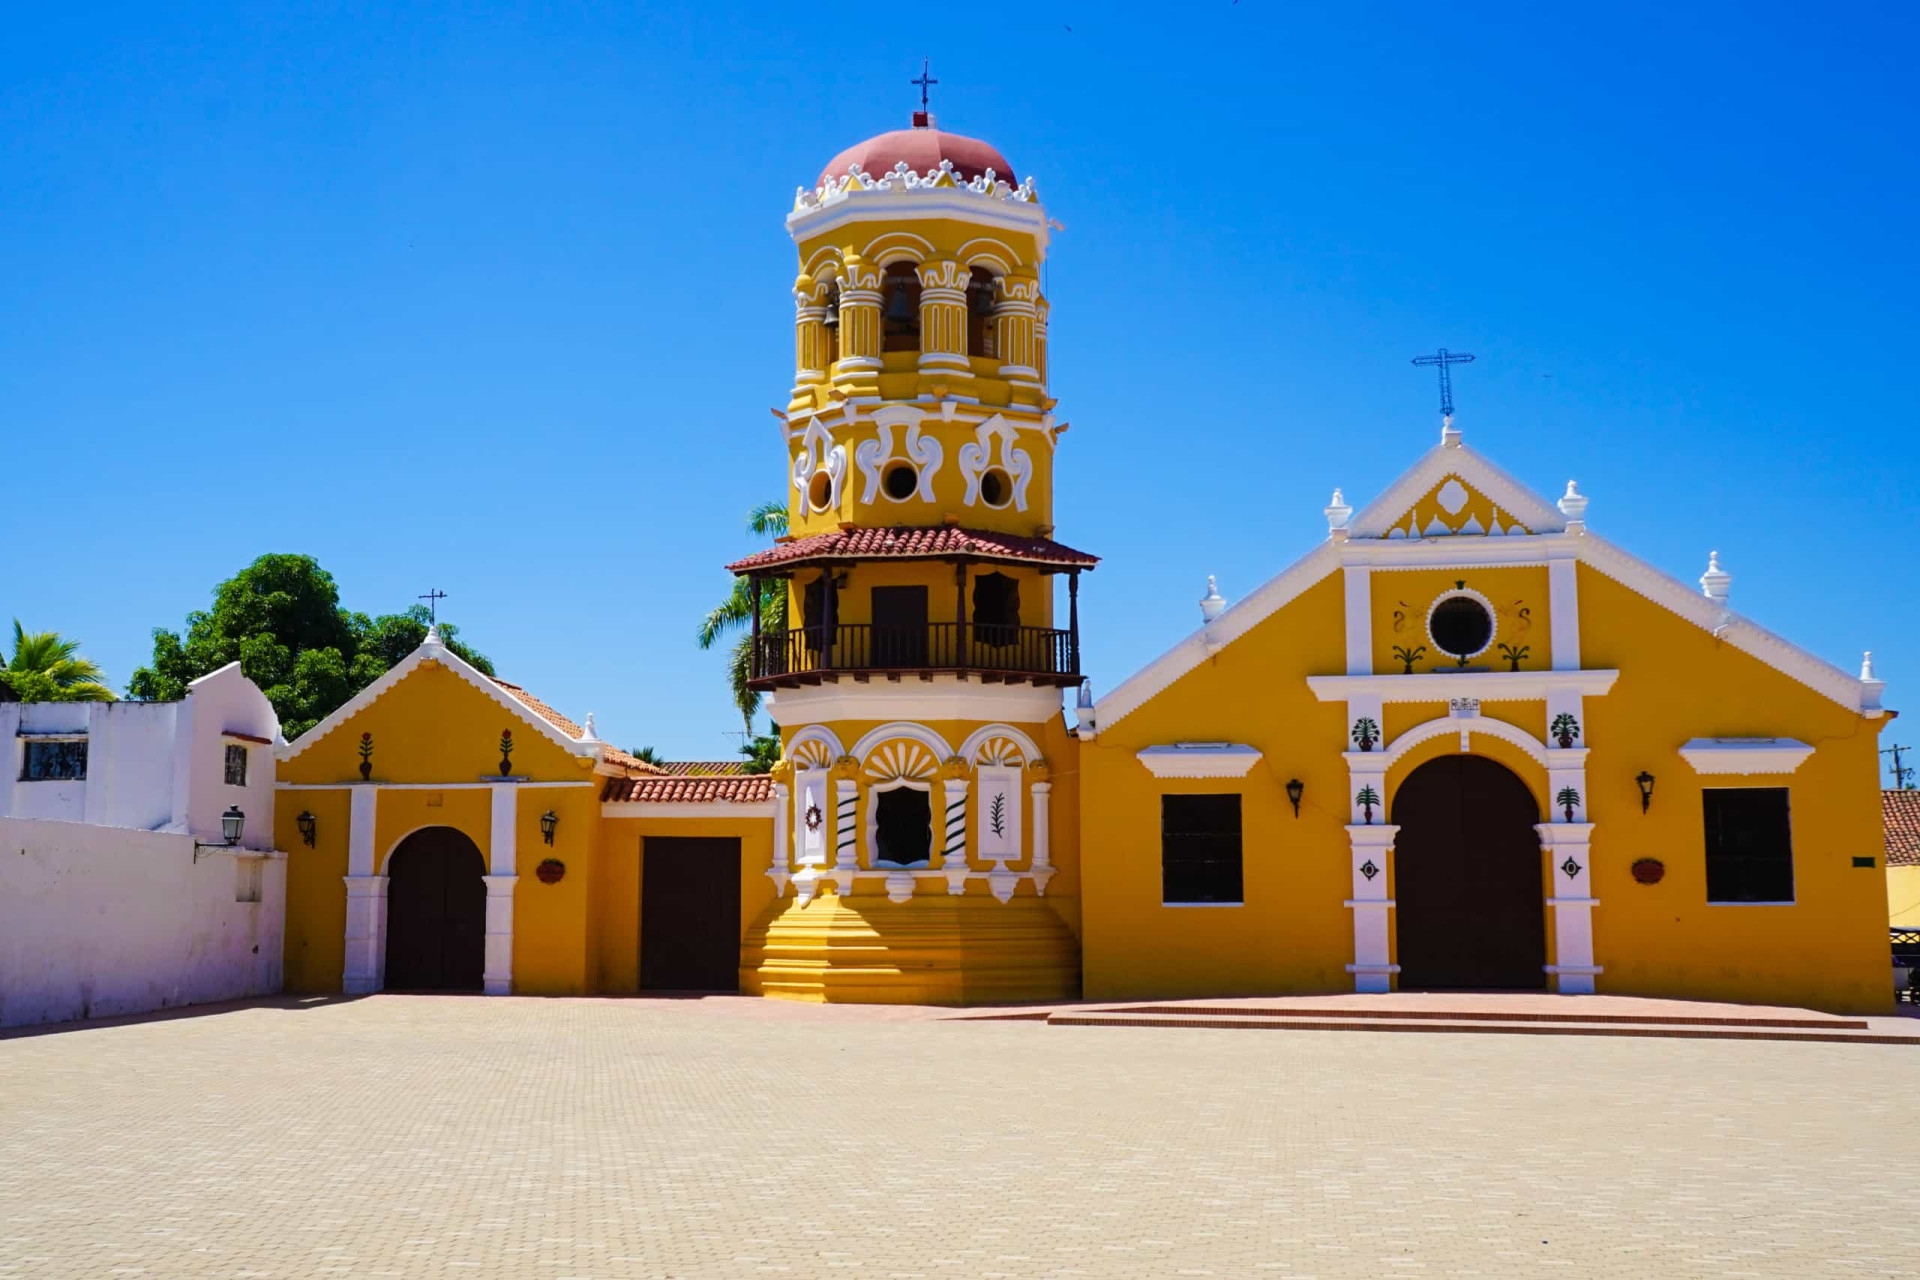 Location: Bolivar Department<br>Criteria: Cultural<br>Year established: 1995<br>Description: The town is known for the preservation of its colonial architectural features, a fascinating mix of Spanish and Indian styles exemplified by the Santa Bárbara Church (pictured) and the San Juan de Dios Hospital.<p>You may also like:<a href="https://www.starsinsider.com/n/460709?utm_source=msn.com&utm_medium=display&utm_campaign=referral_description&utm_content=413555v12en-us"> Telltale signs of a gifted child</a></p>